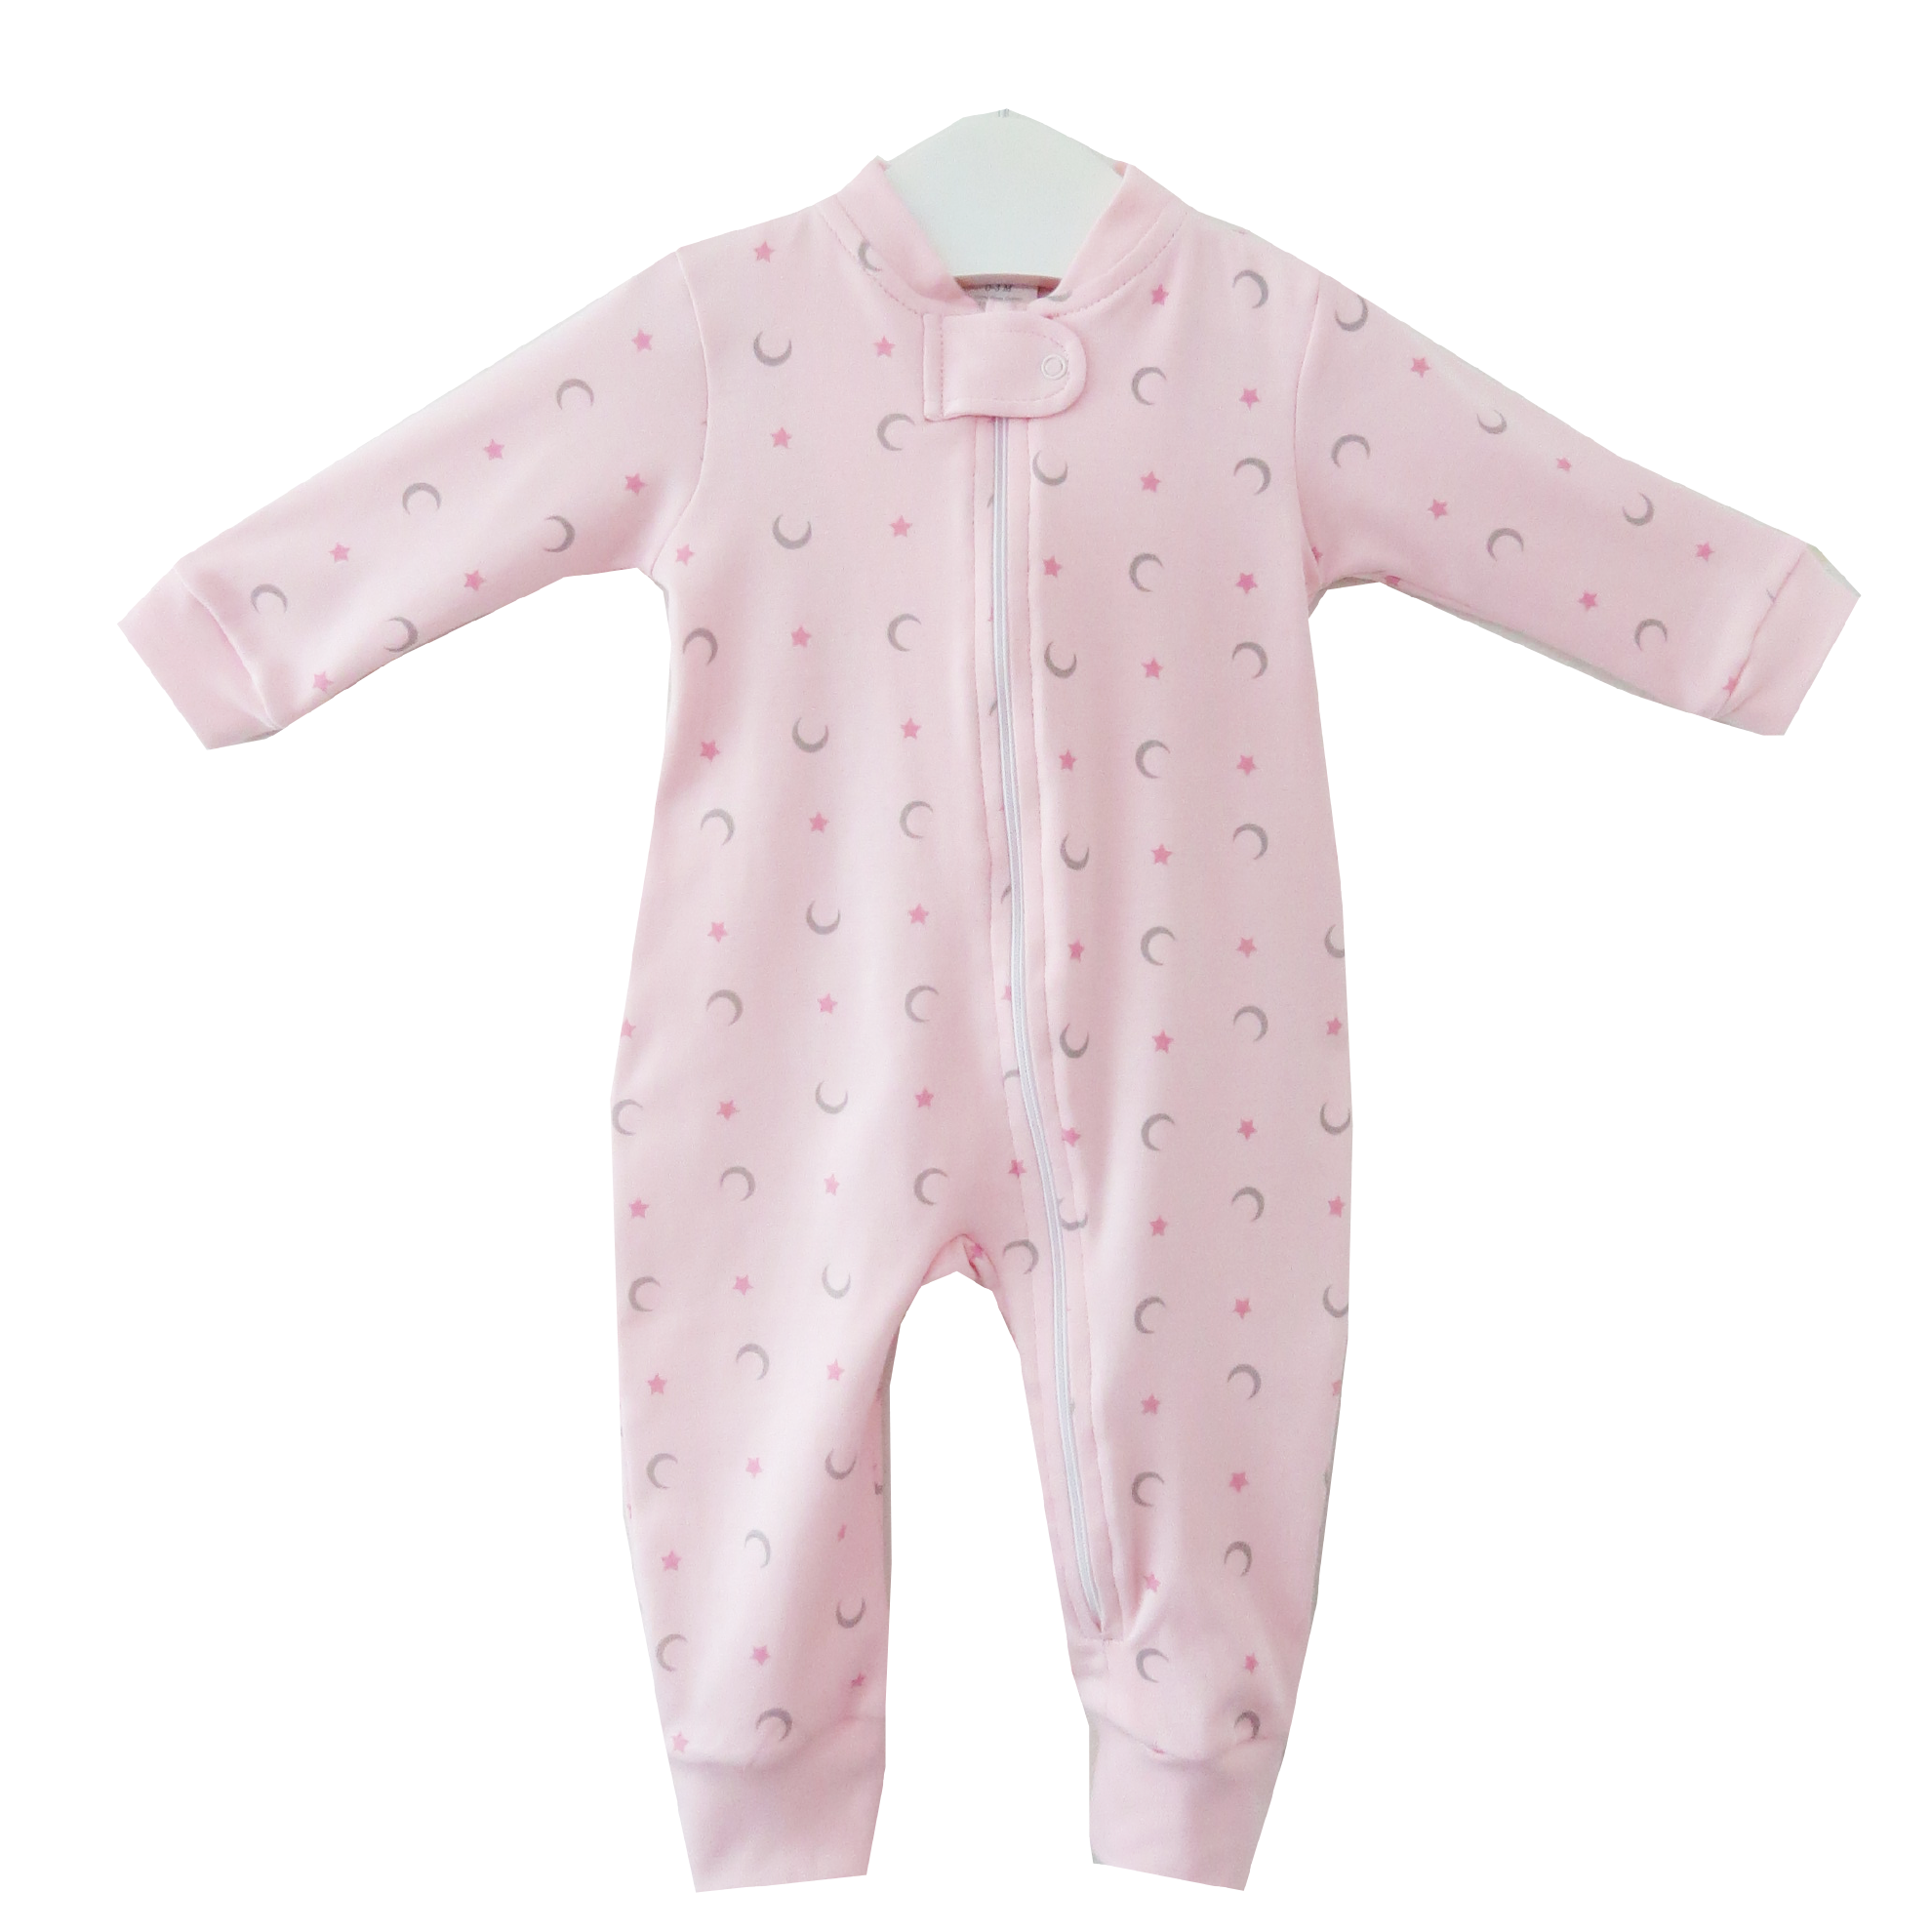 Pink pima cotton baby girl footie with moon and star print